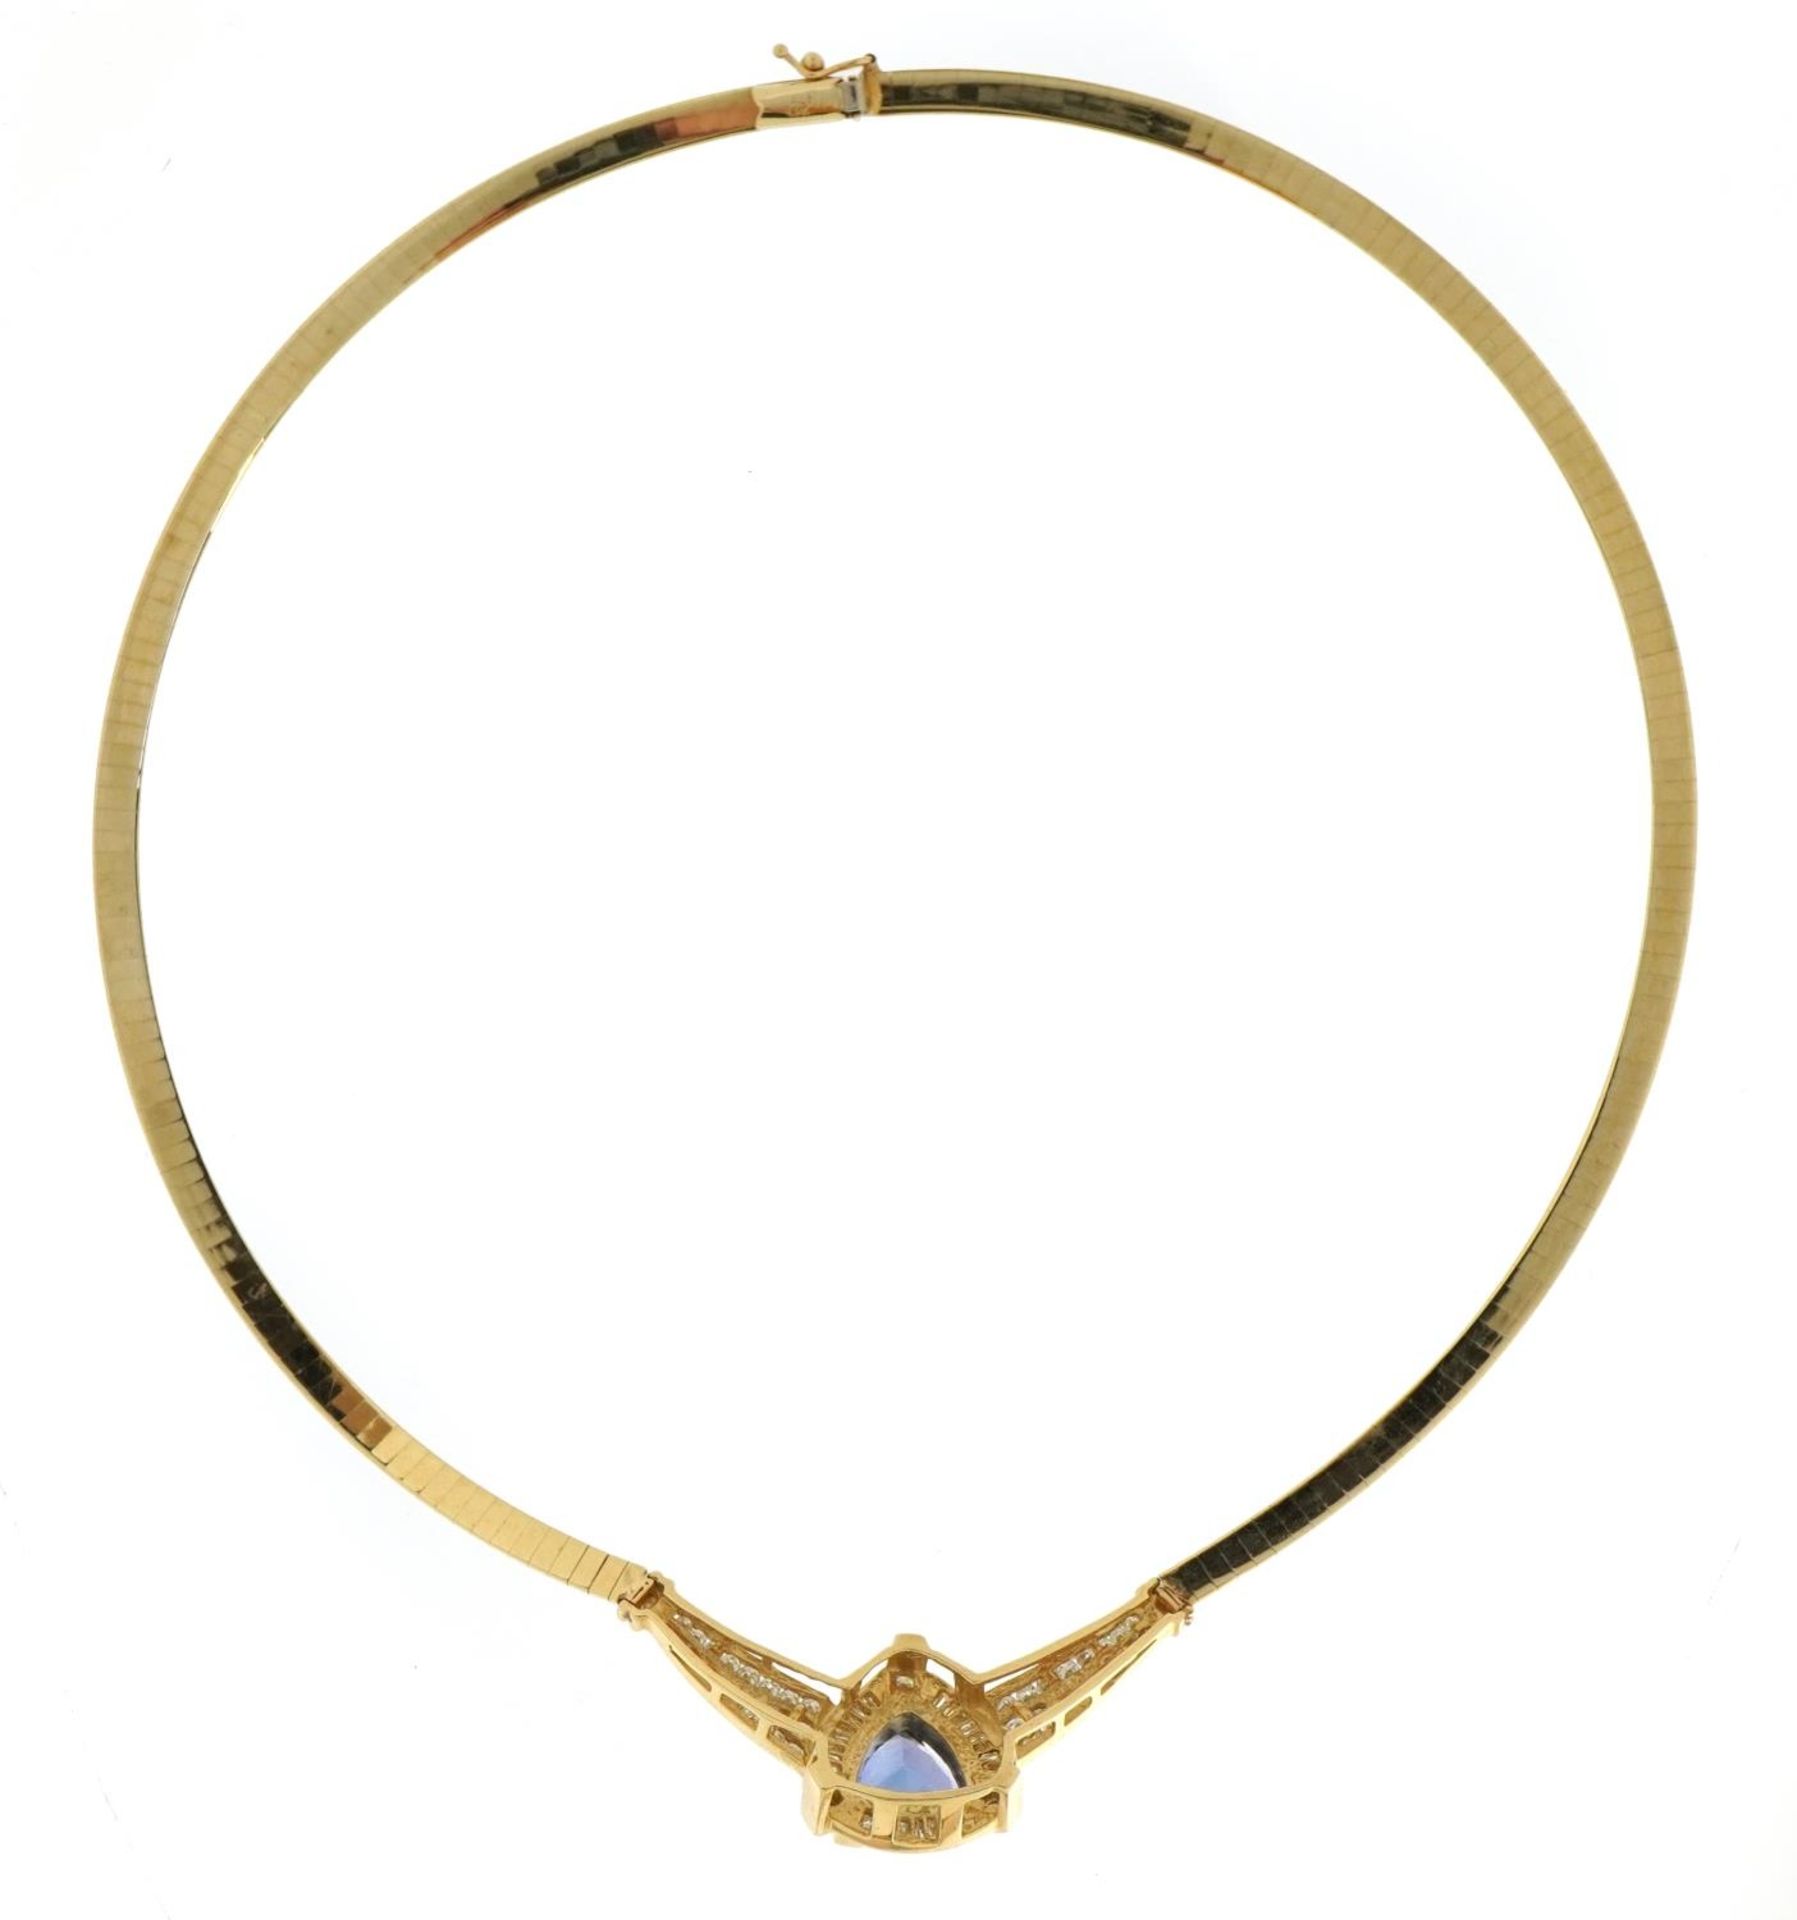 14k gold tanzanite and diamond snake link necklace, the tanzanite approximately 10.5mm x 10.7mm x - Image 3 of 6